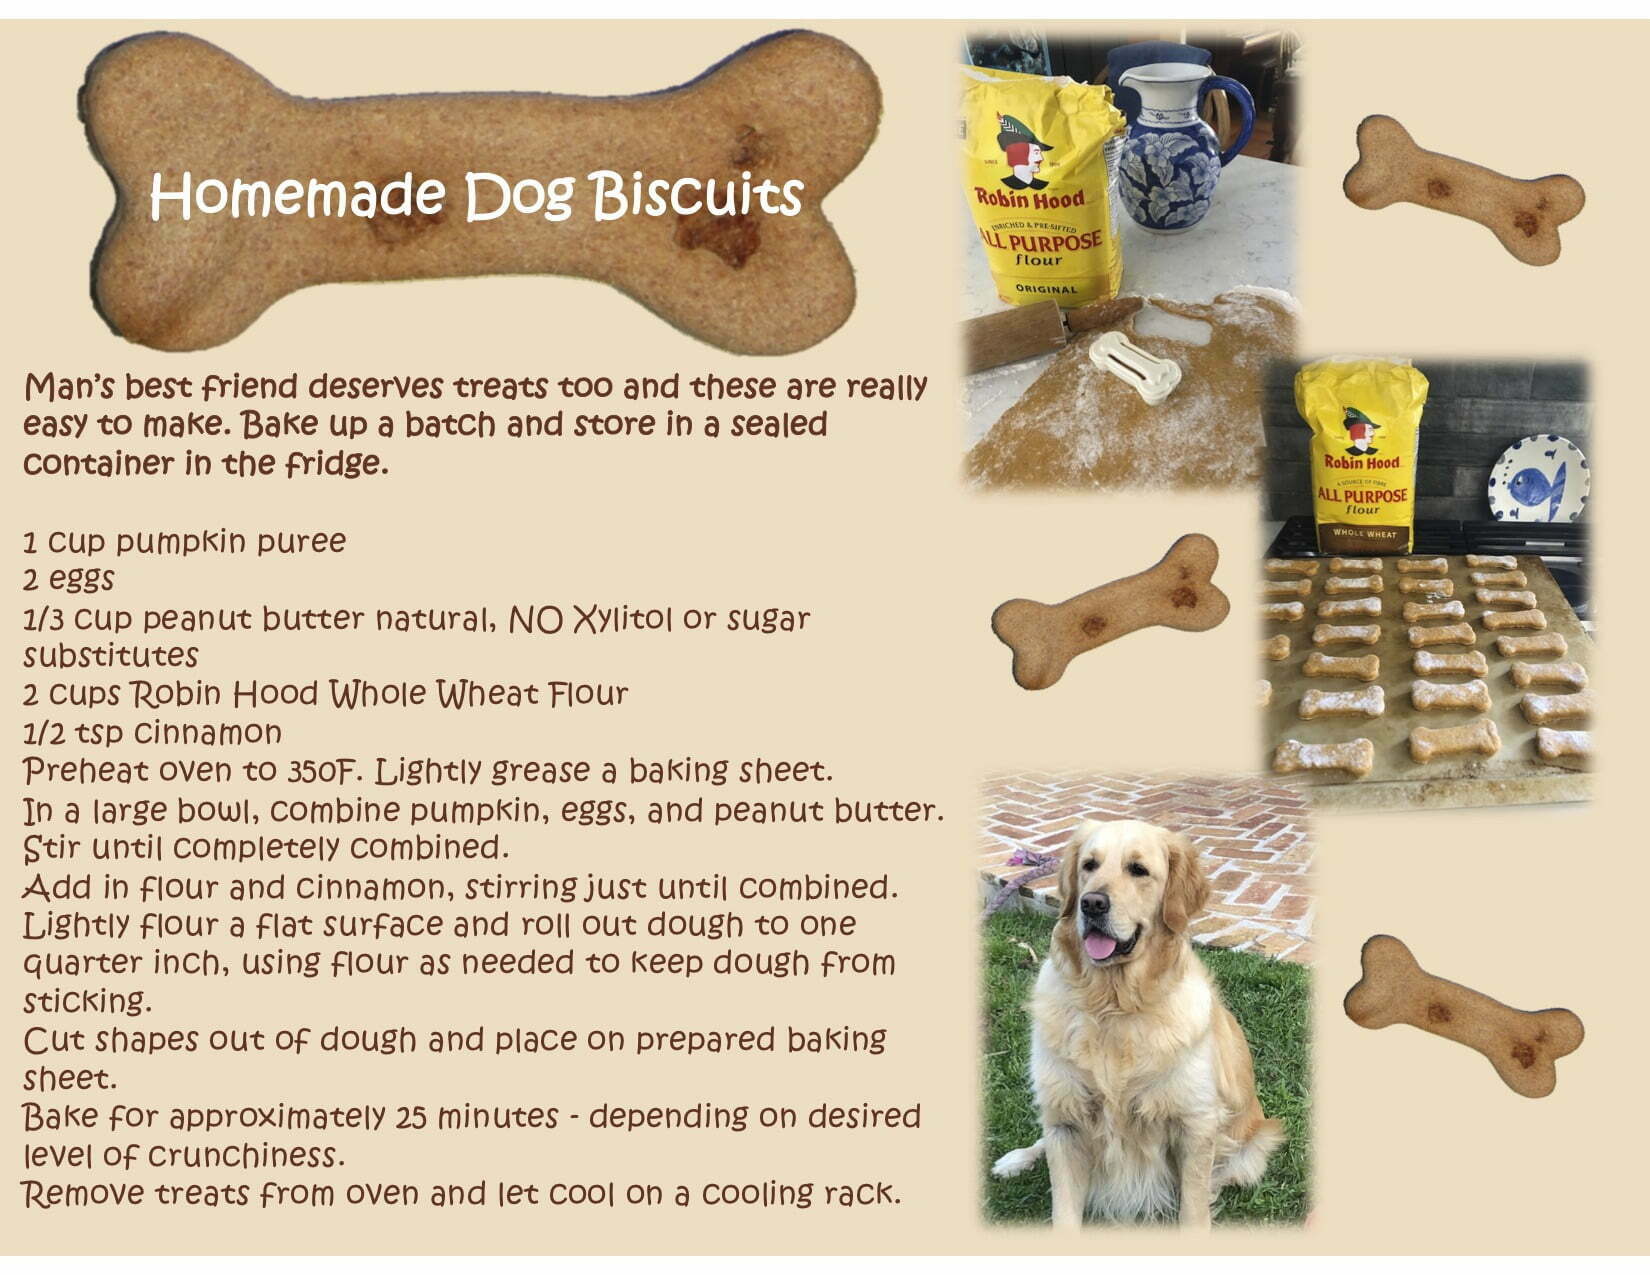 Homemade Dog Biscuits copy